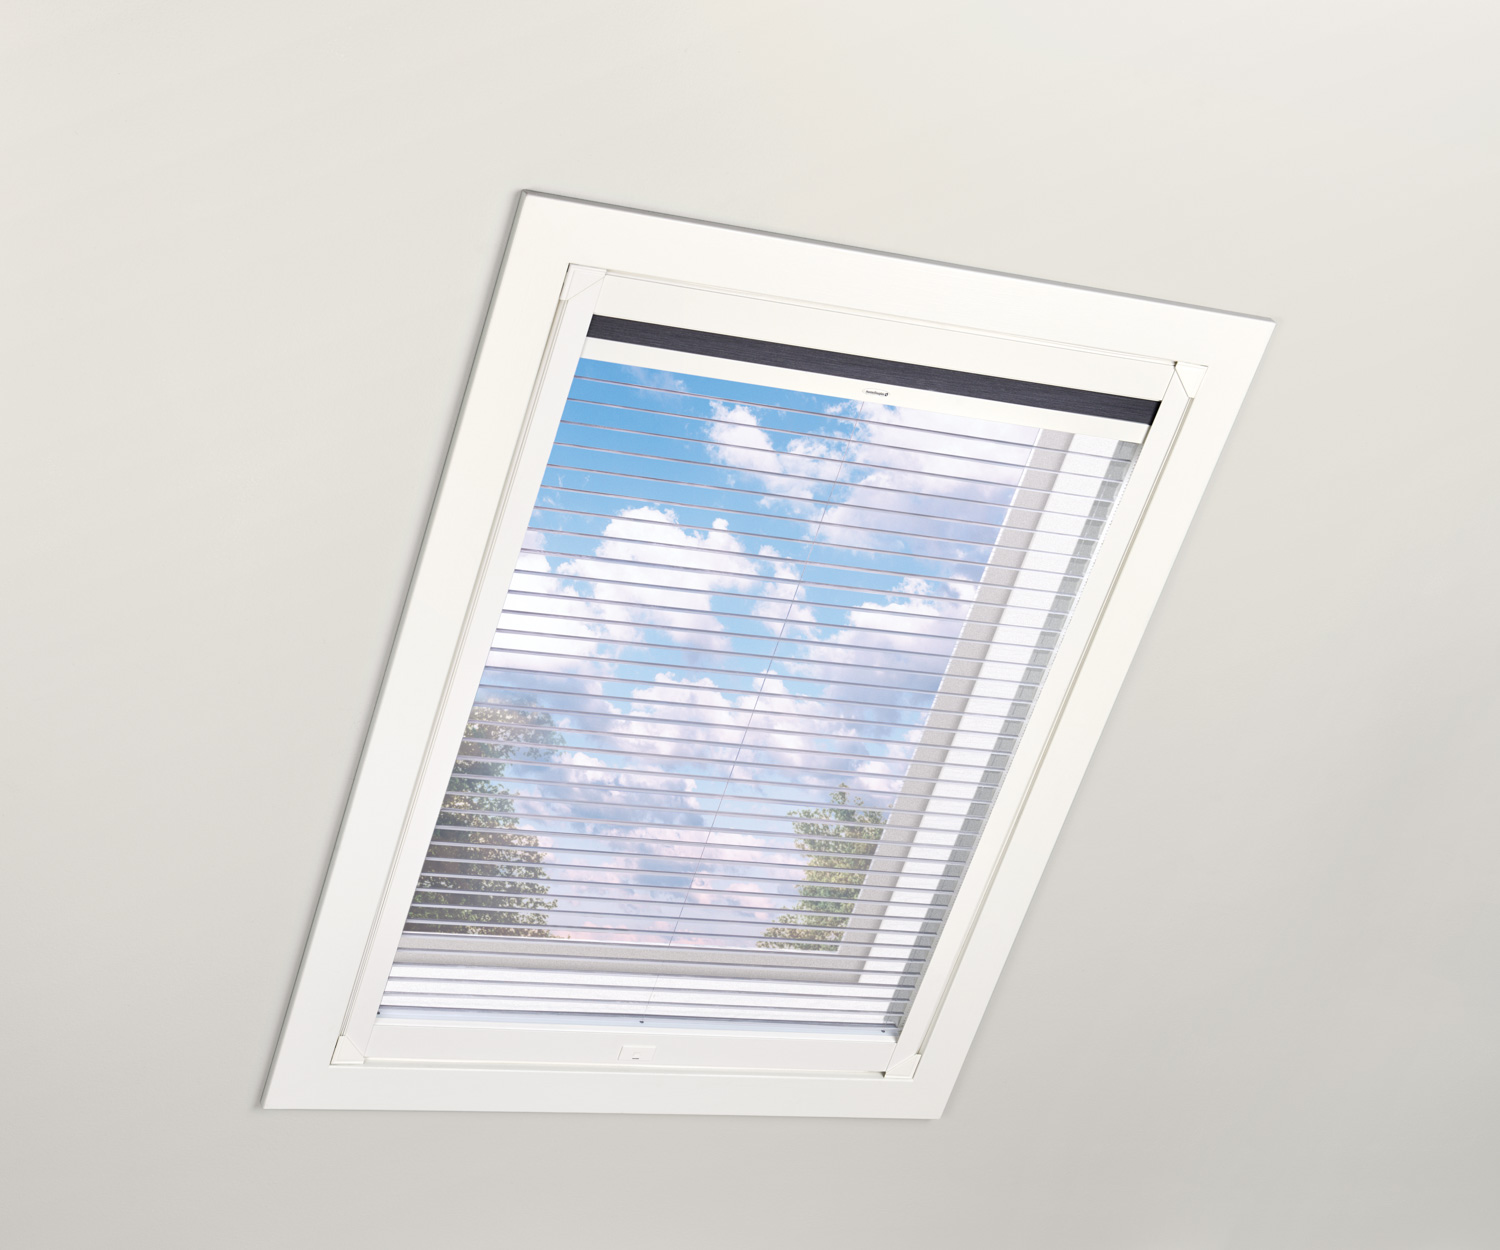 Hunter Douglas Duette® Skylight Cellular Shades - Energy-efficient window coverings for skylights, providing insulation and light control.